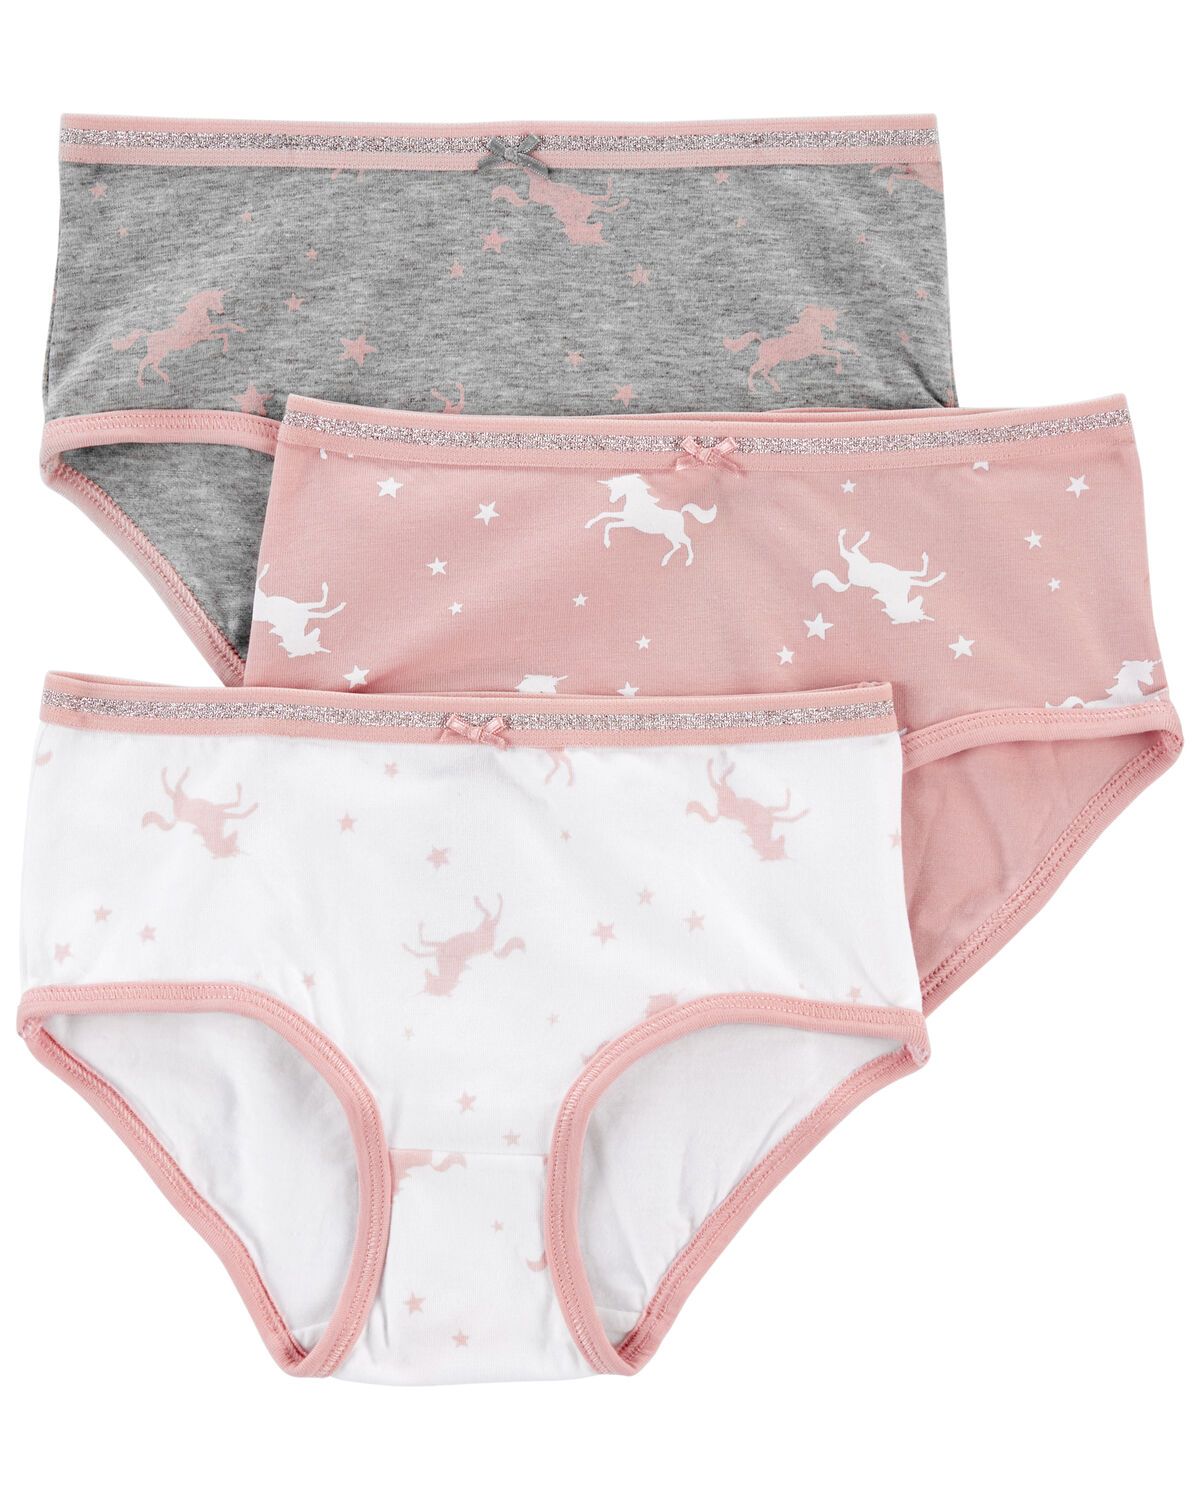 Carters Girls 4-6X 7-Pack Days of the Week Panty (Multi 4/5T) 